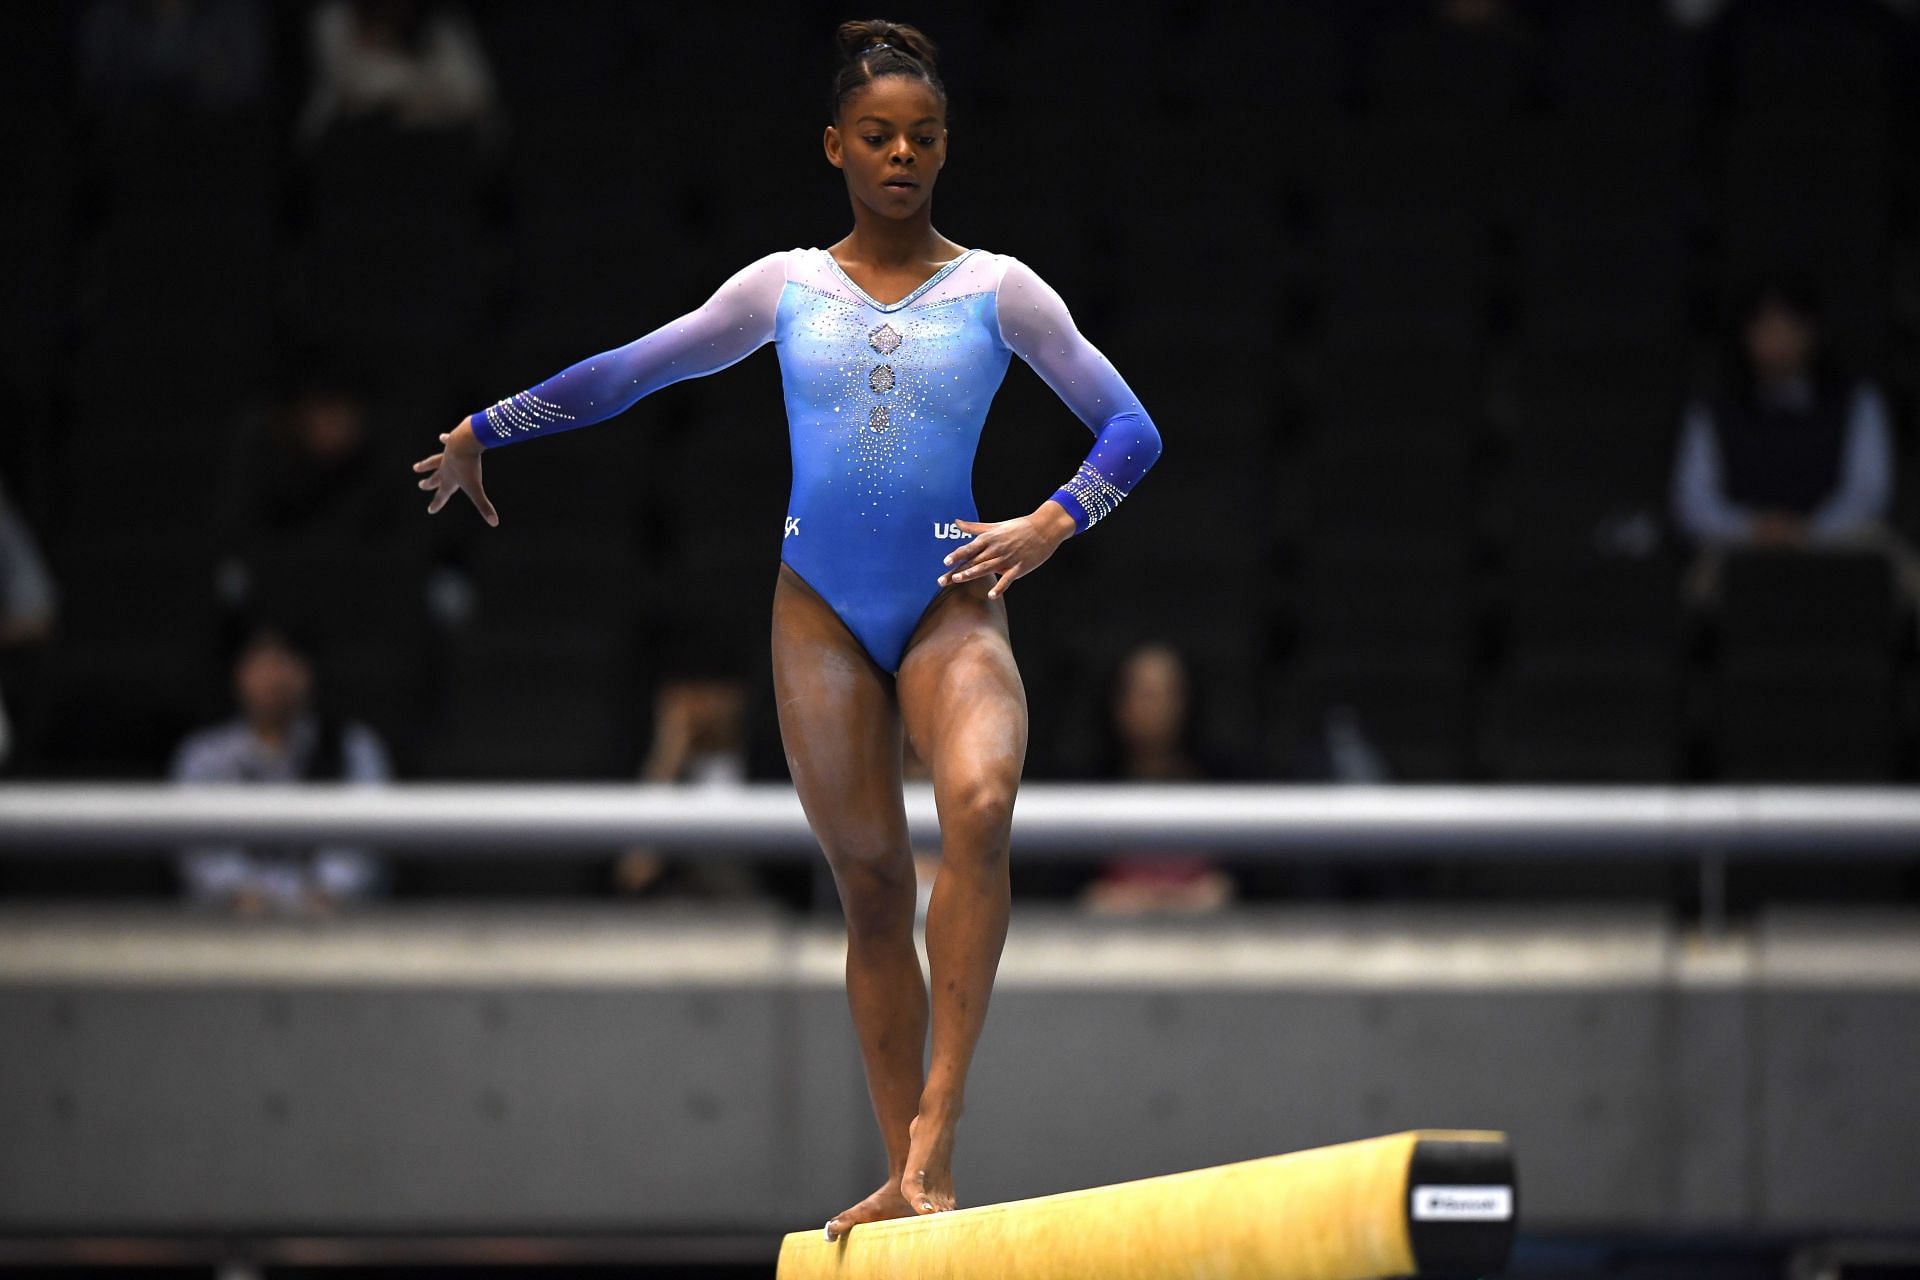 Trinity Thomas will also make a return to the sport alongside the two Olympic champions.